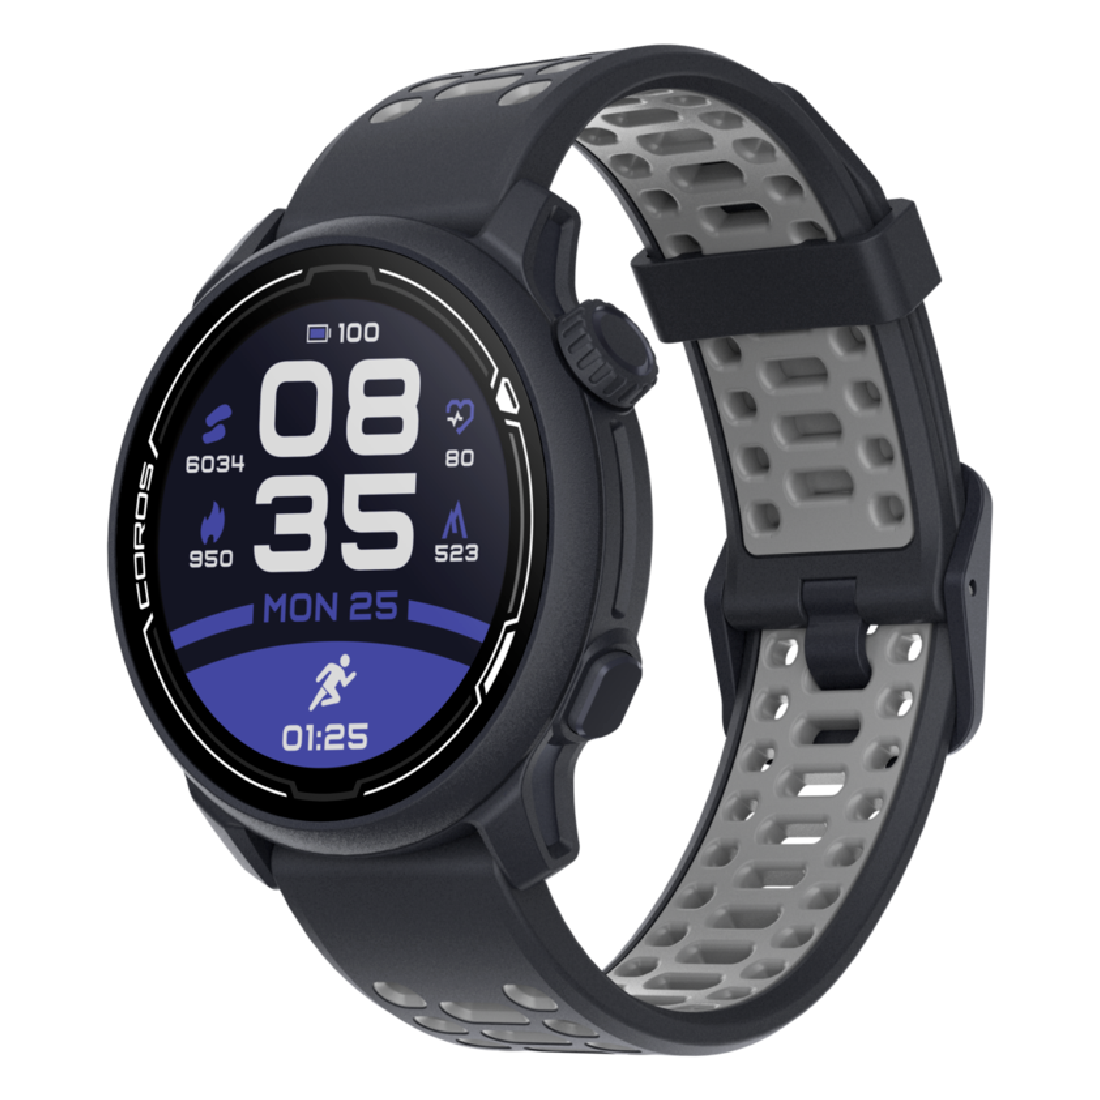 COROS PACE 2 Sport Watch GPS Heart Rate Monitor, 20 Days